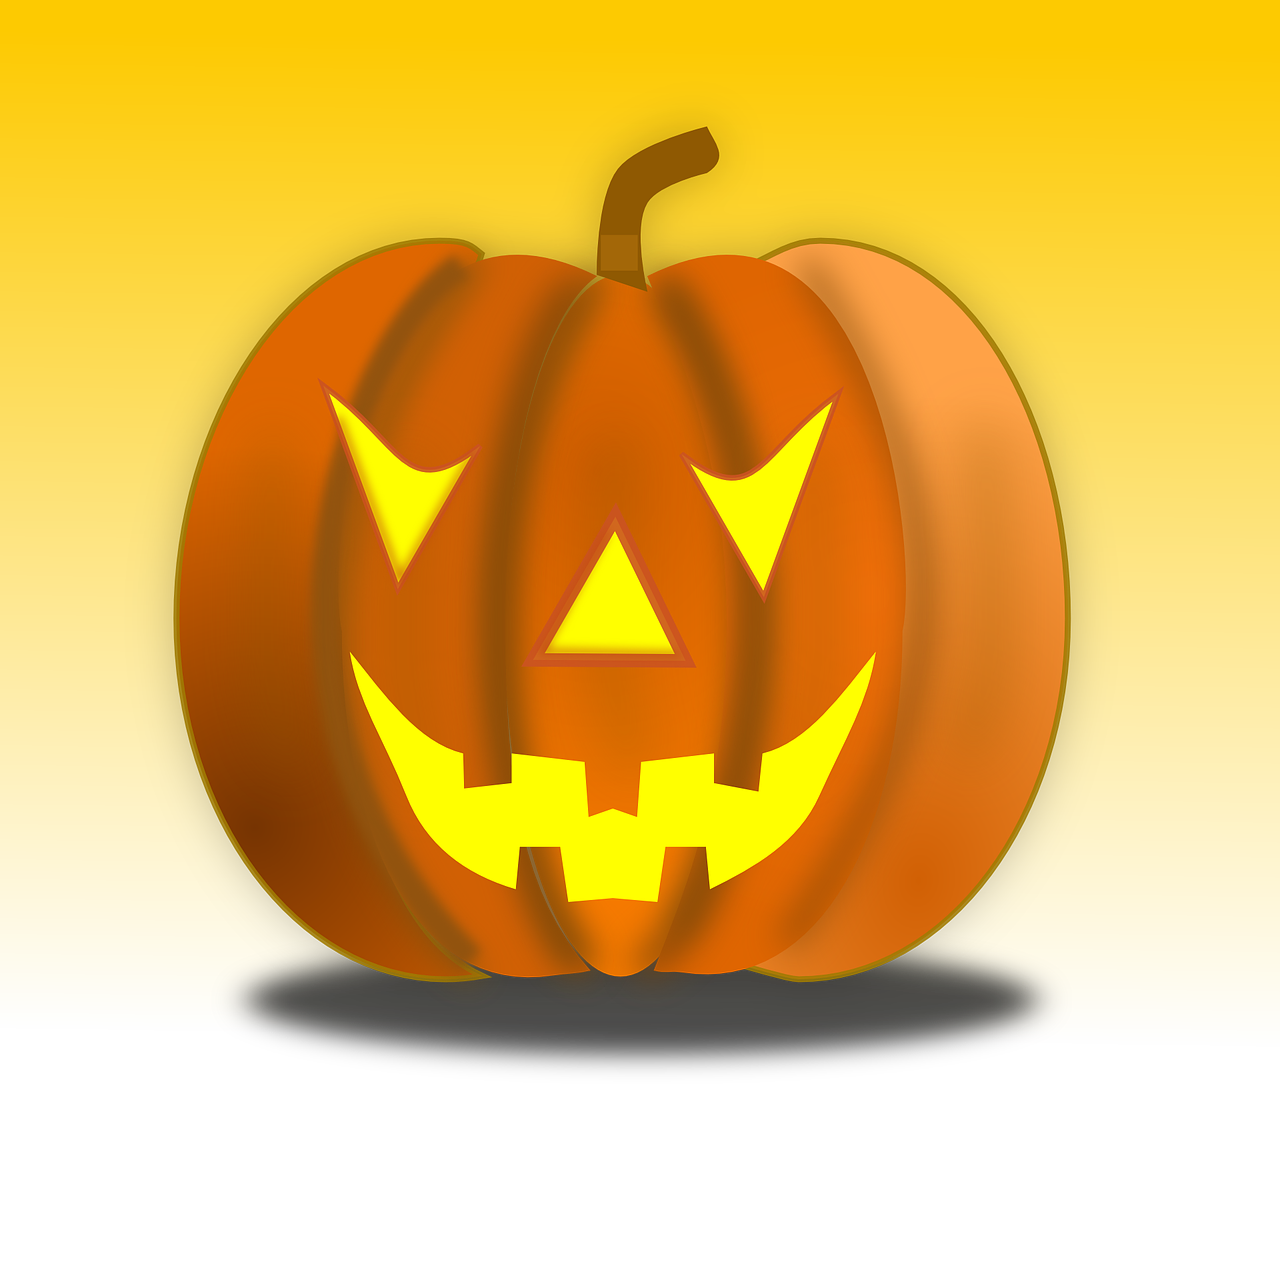 a halloween pumpkin sitting on top of a table, a digital rendering, digital art, vectorized, glowing yellow face, flash photo, ¯_(ツ)_/¯